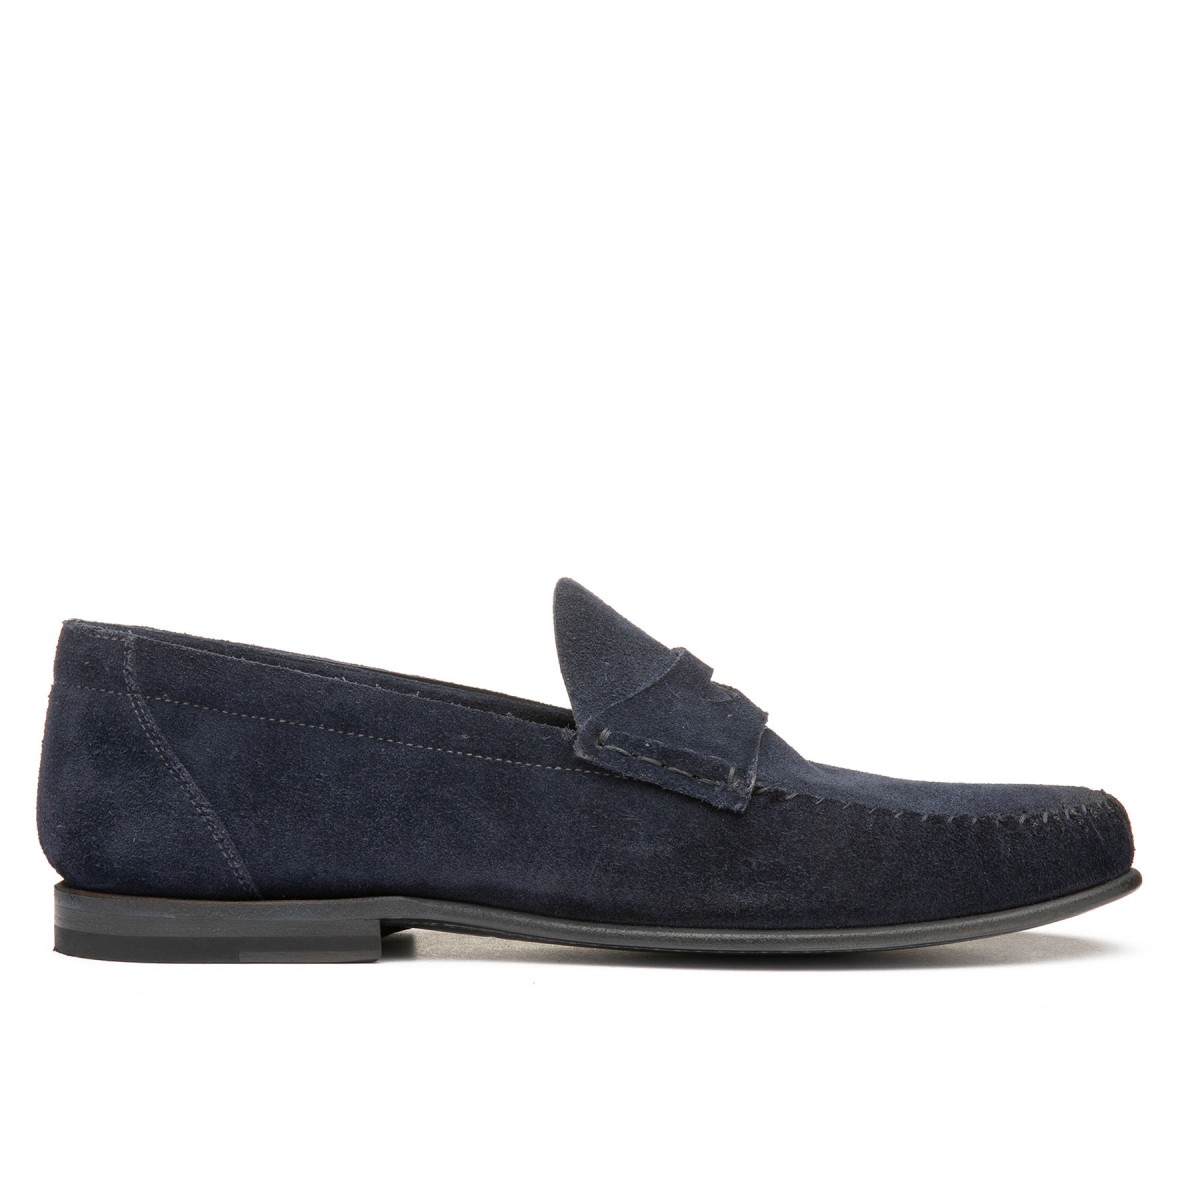 Navy suede Penny loafers